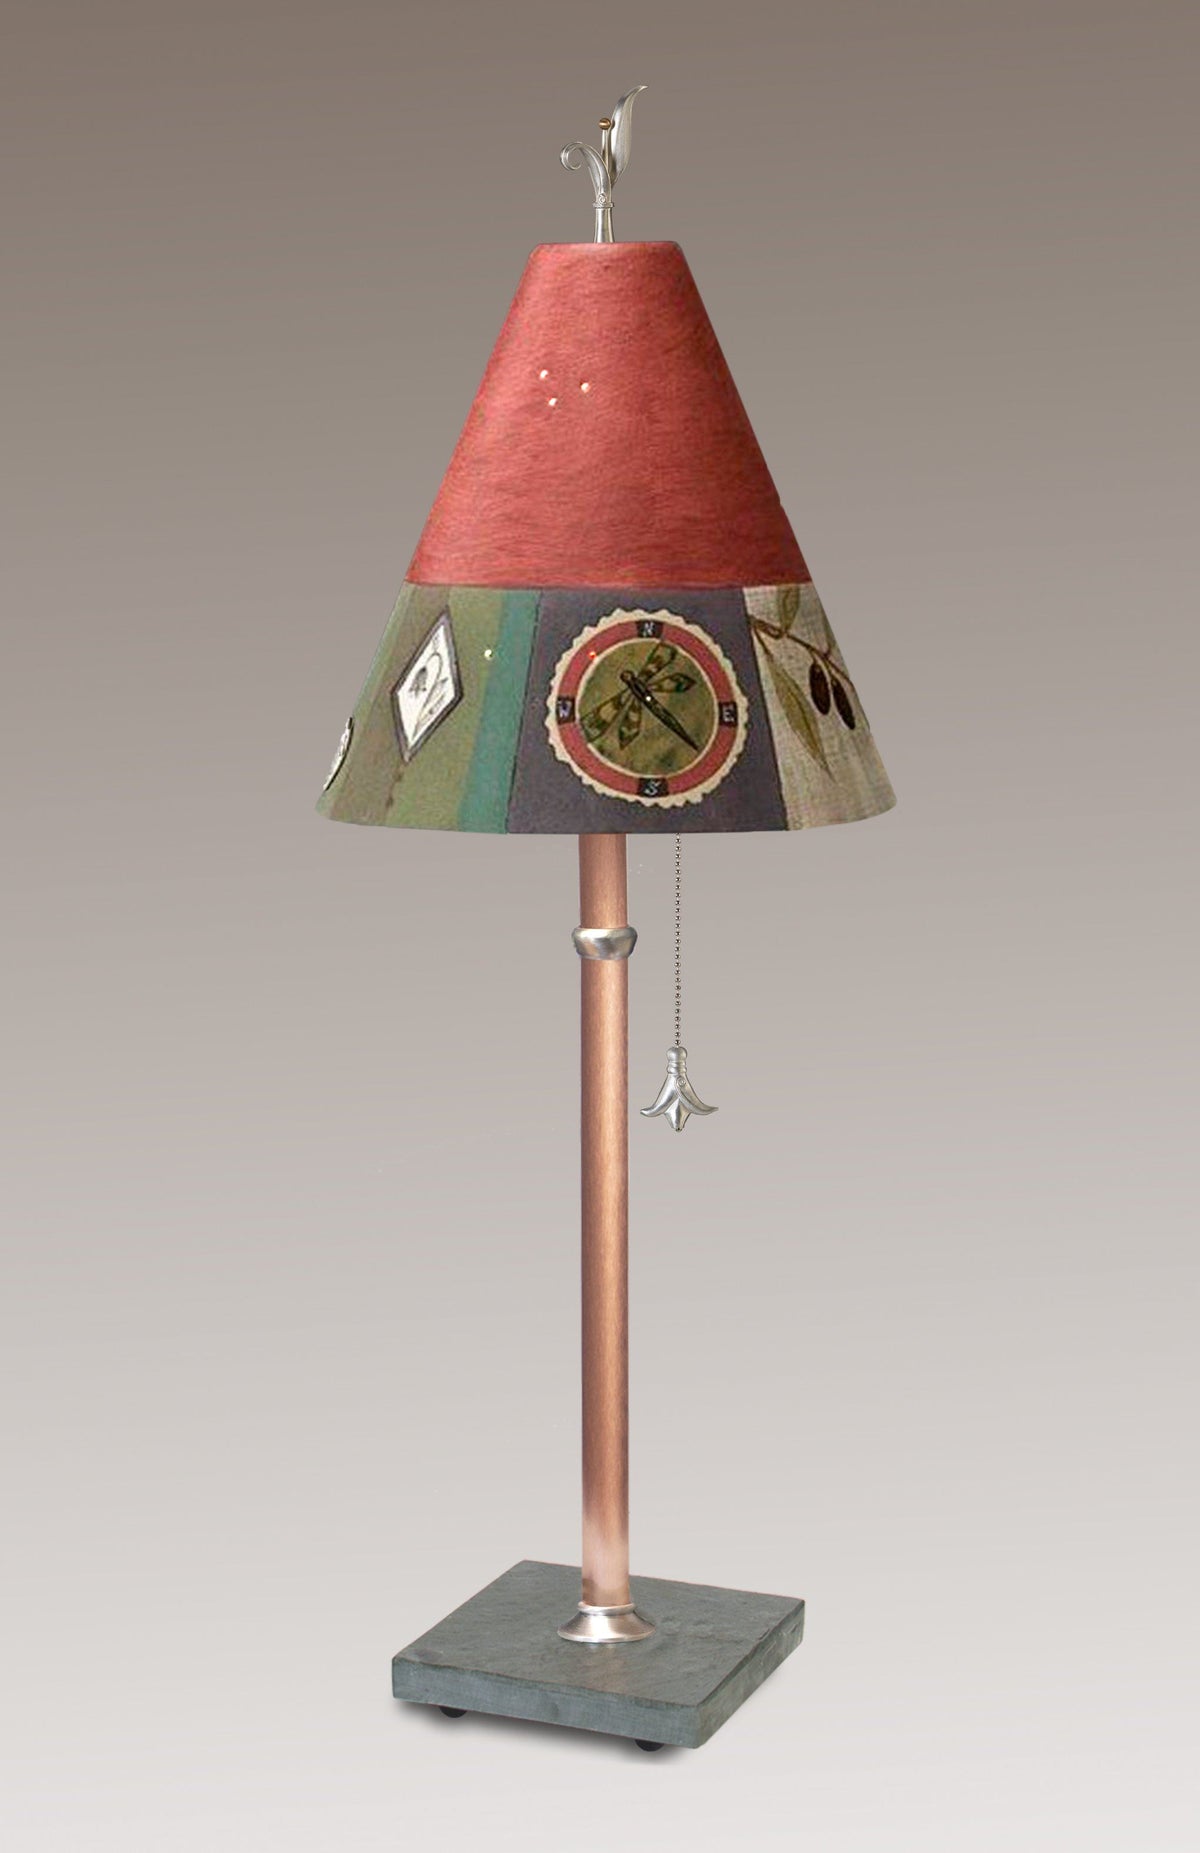 Janna Ugone &amp; Co Table Lamps Copper Table Lamp with Small Conical Ceramic Shade in Lockets Rose